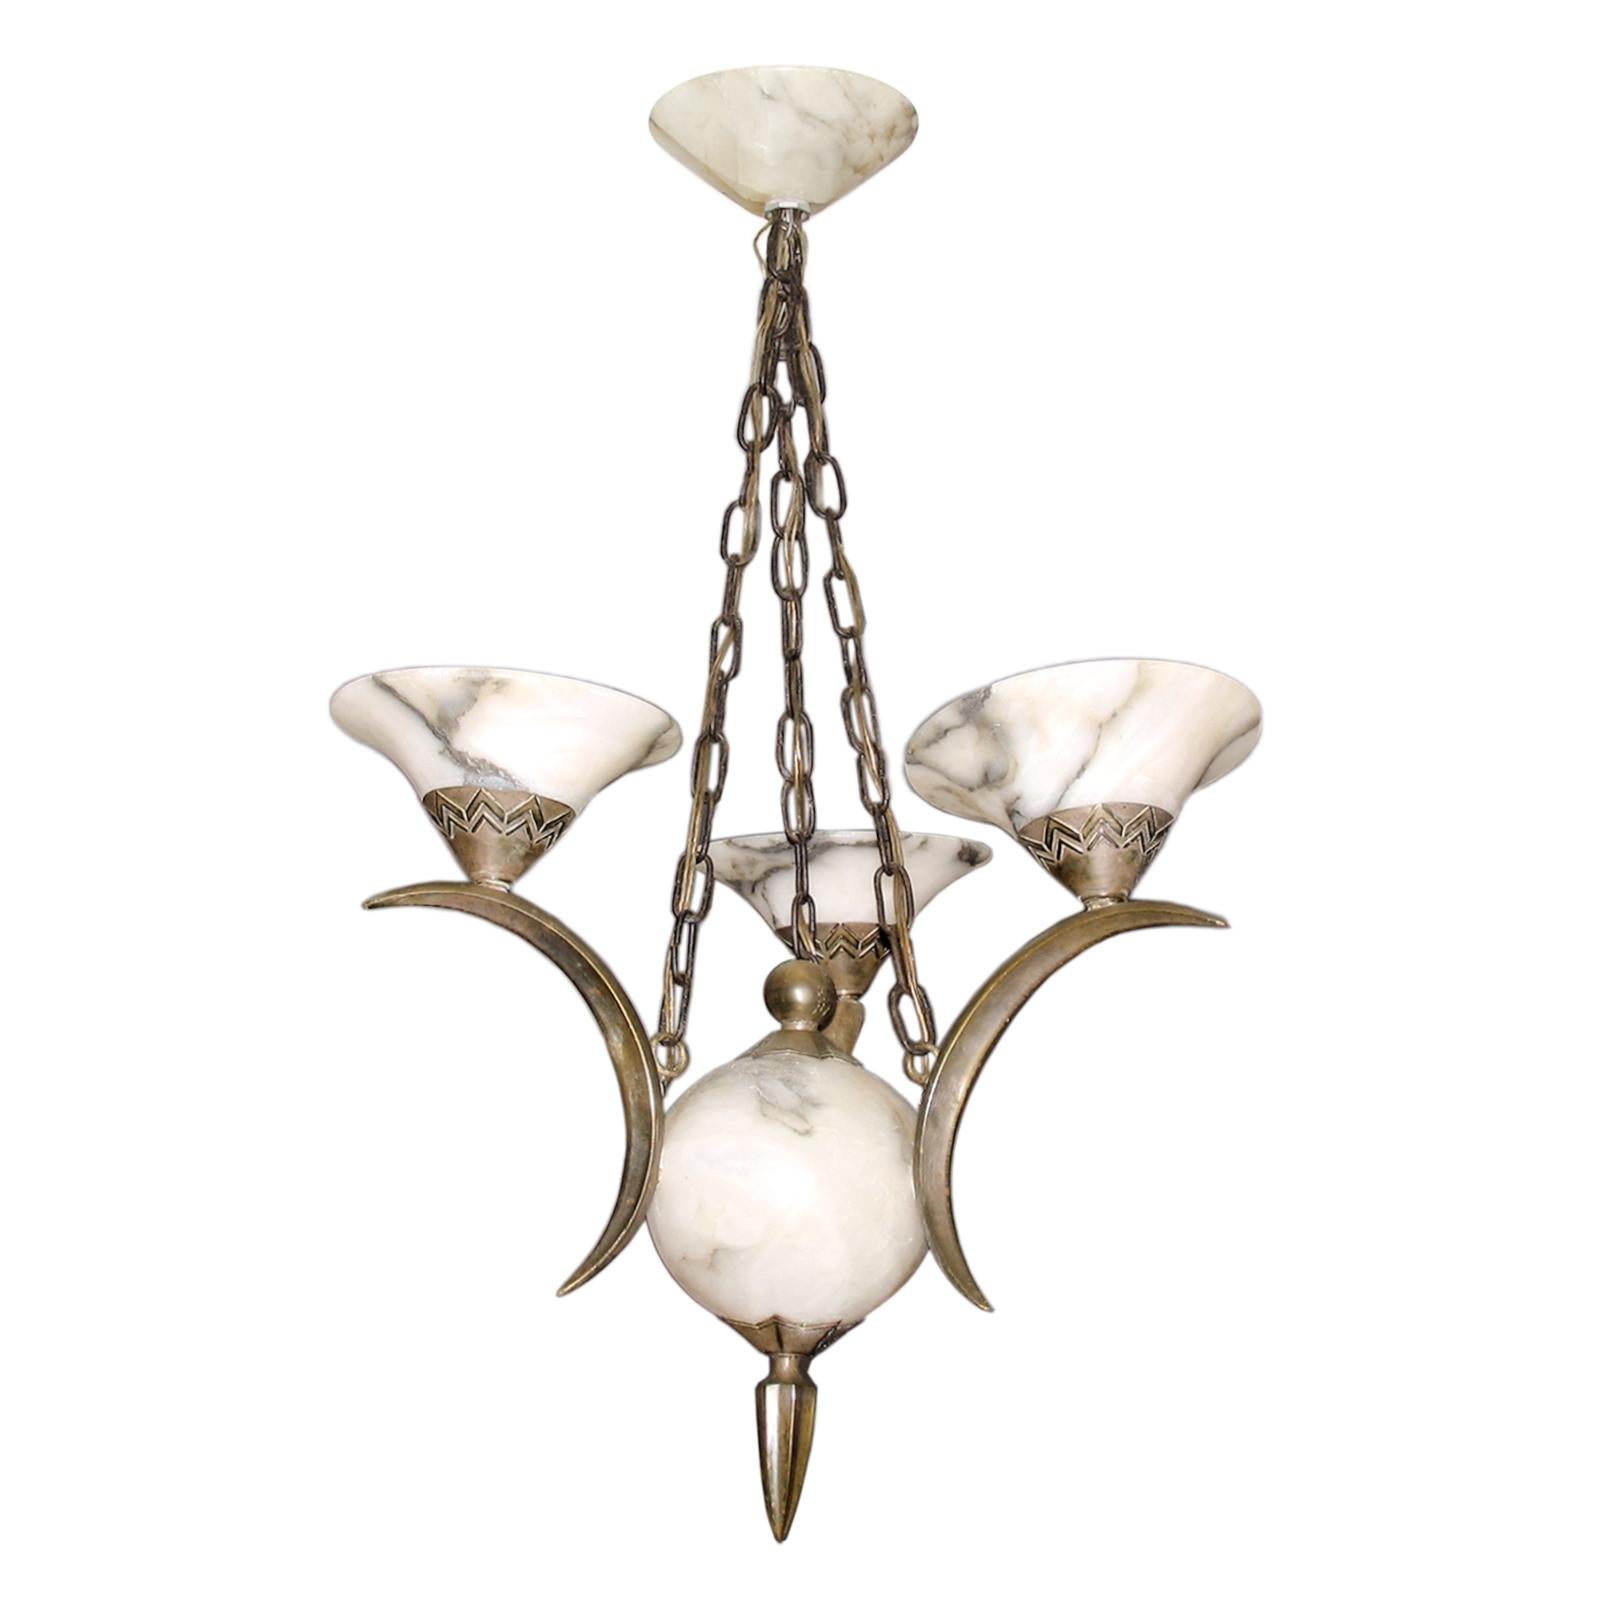 Art Deco chandelier silvered bronze and Alabaster attributed to Simonet Freres.
An exceptional Art Deco chandelier attributed to Simonet Freres, France, 1920s.
Chandelier with three arms made of silvered bronze, each ending with an alabaster